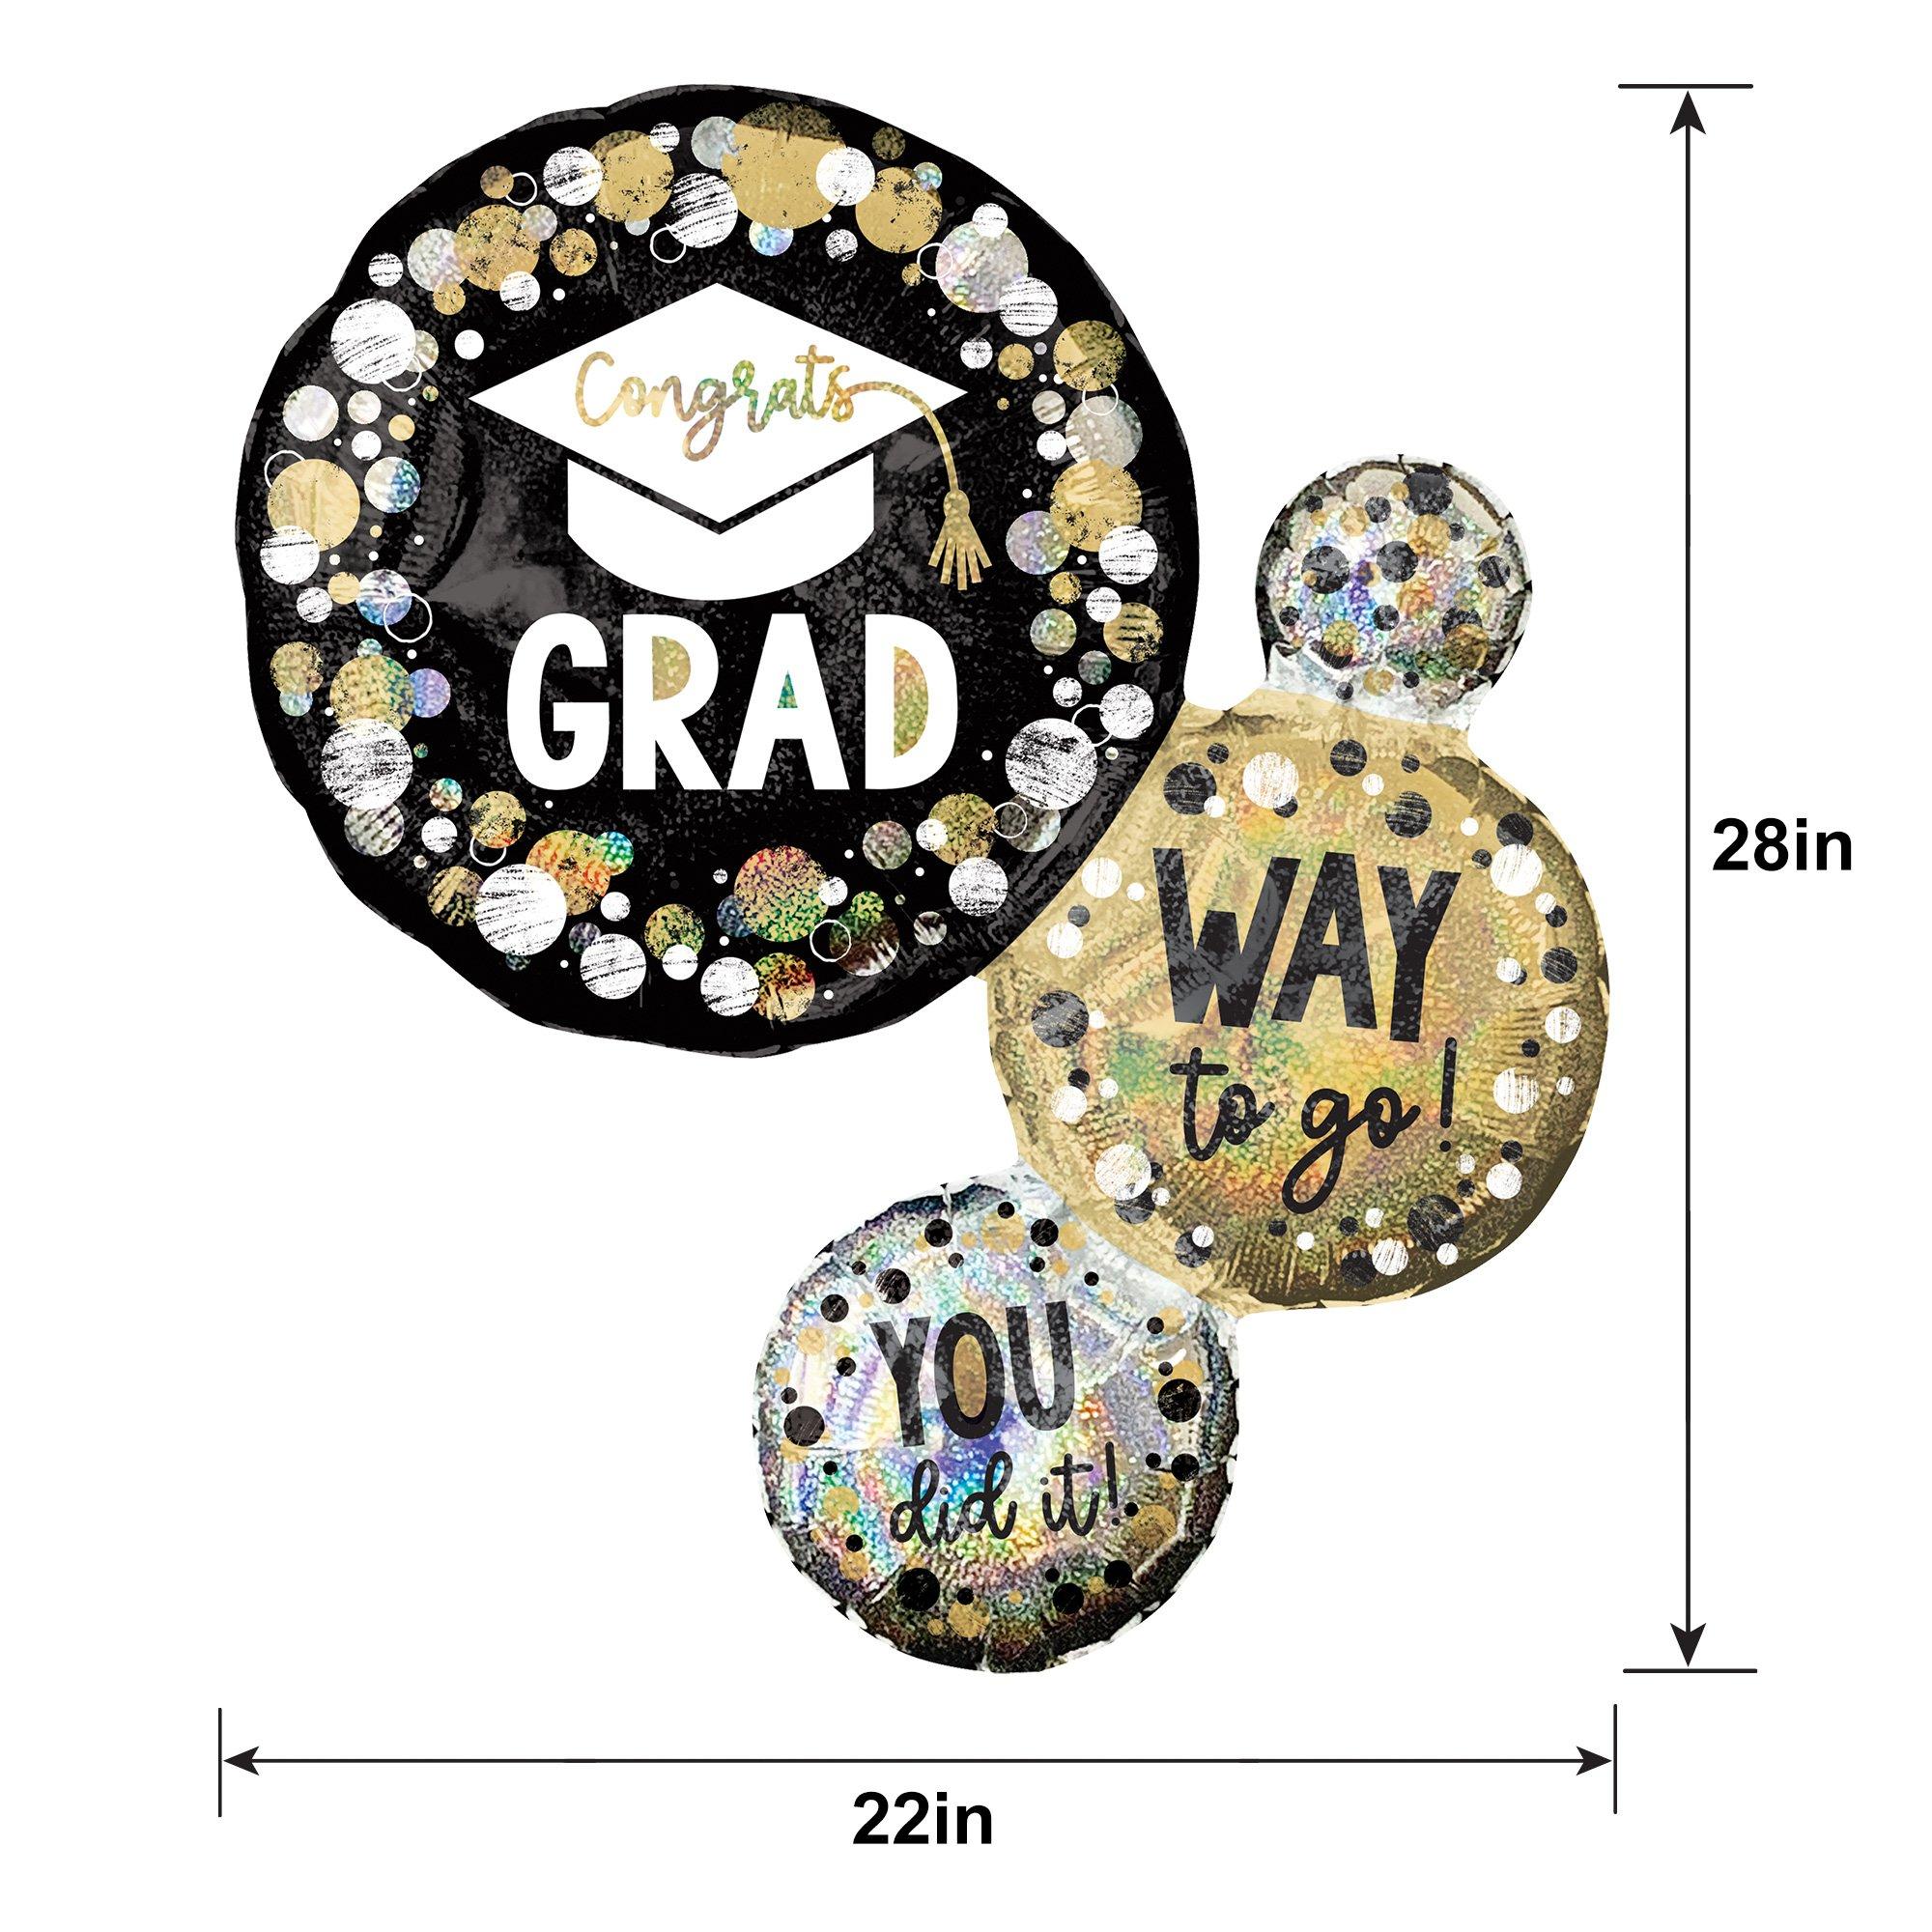 Prismatic Way to Go Grad Cluster Foil Balloon, 22in x 28in - Circles & Dots